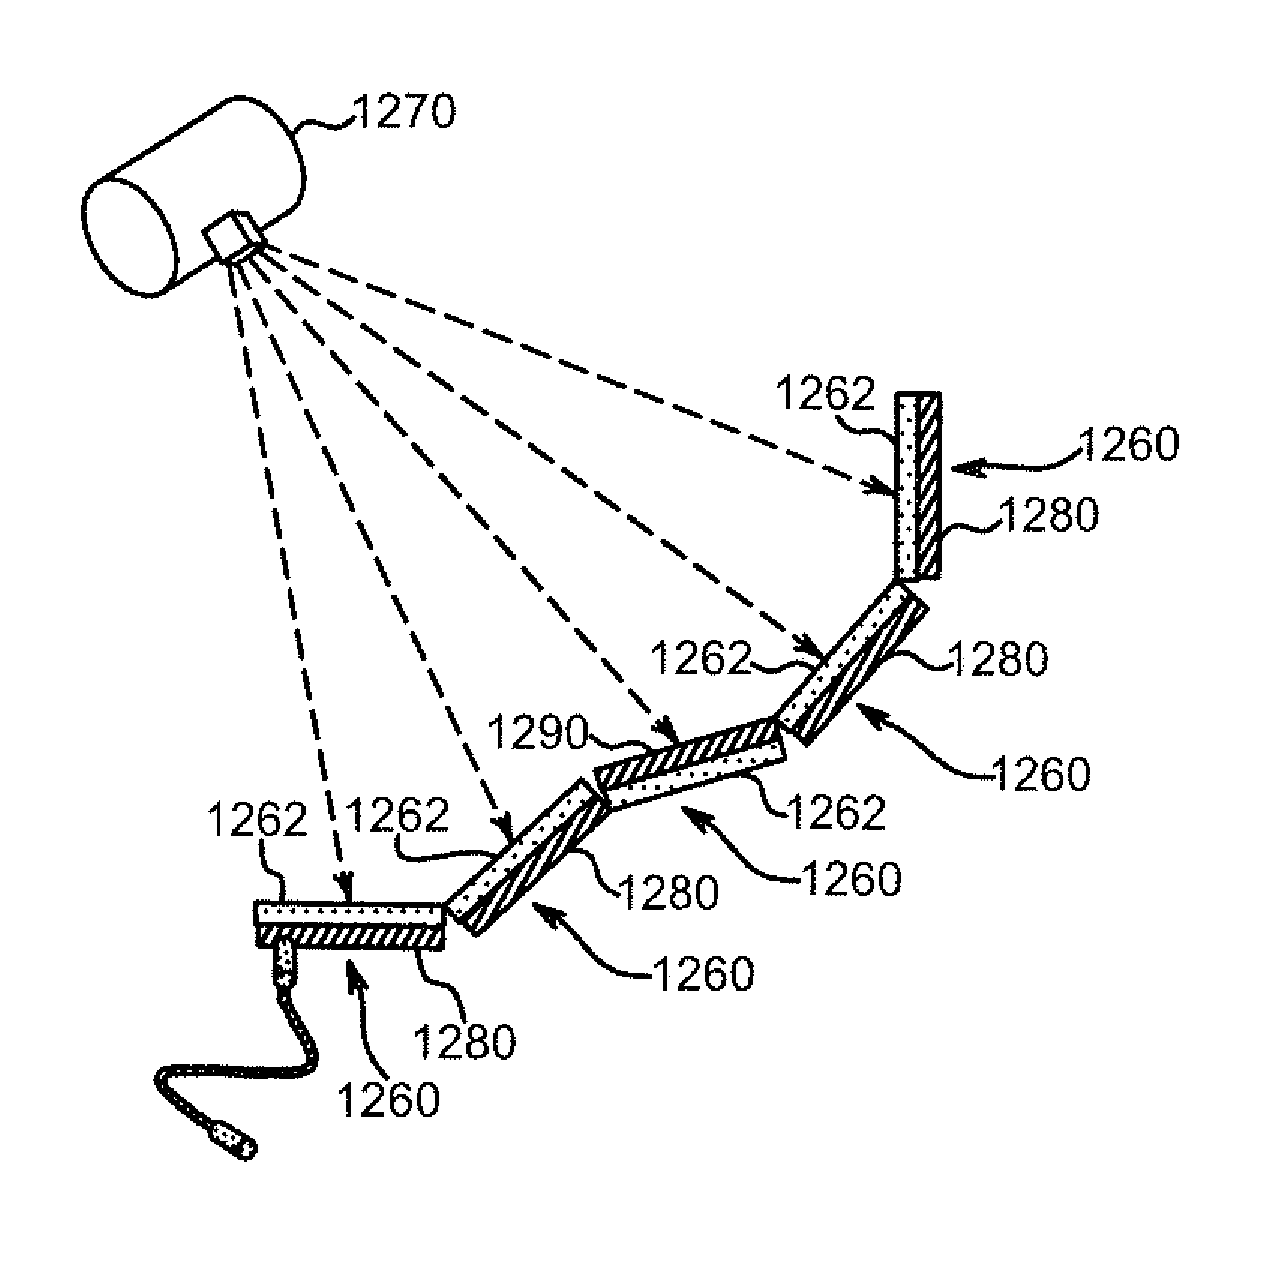 Systems and methods for modular imaging detectors